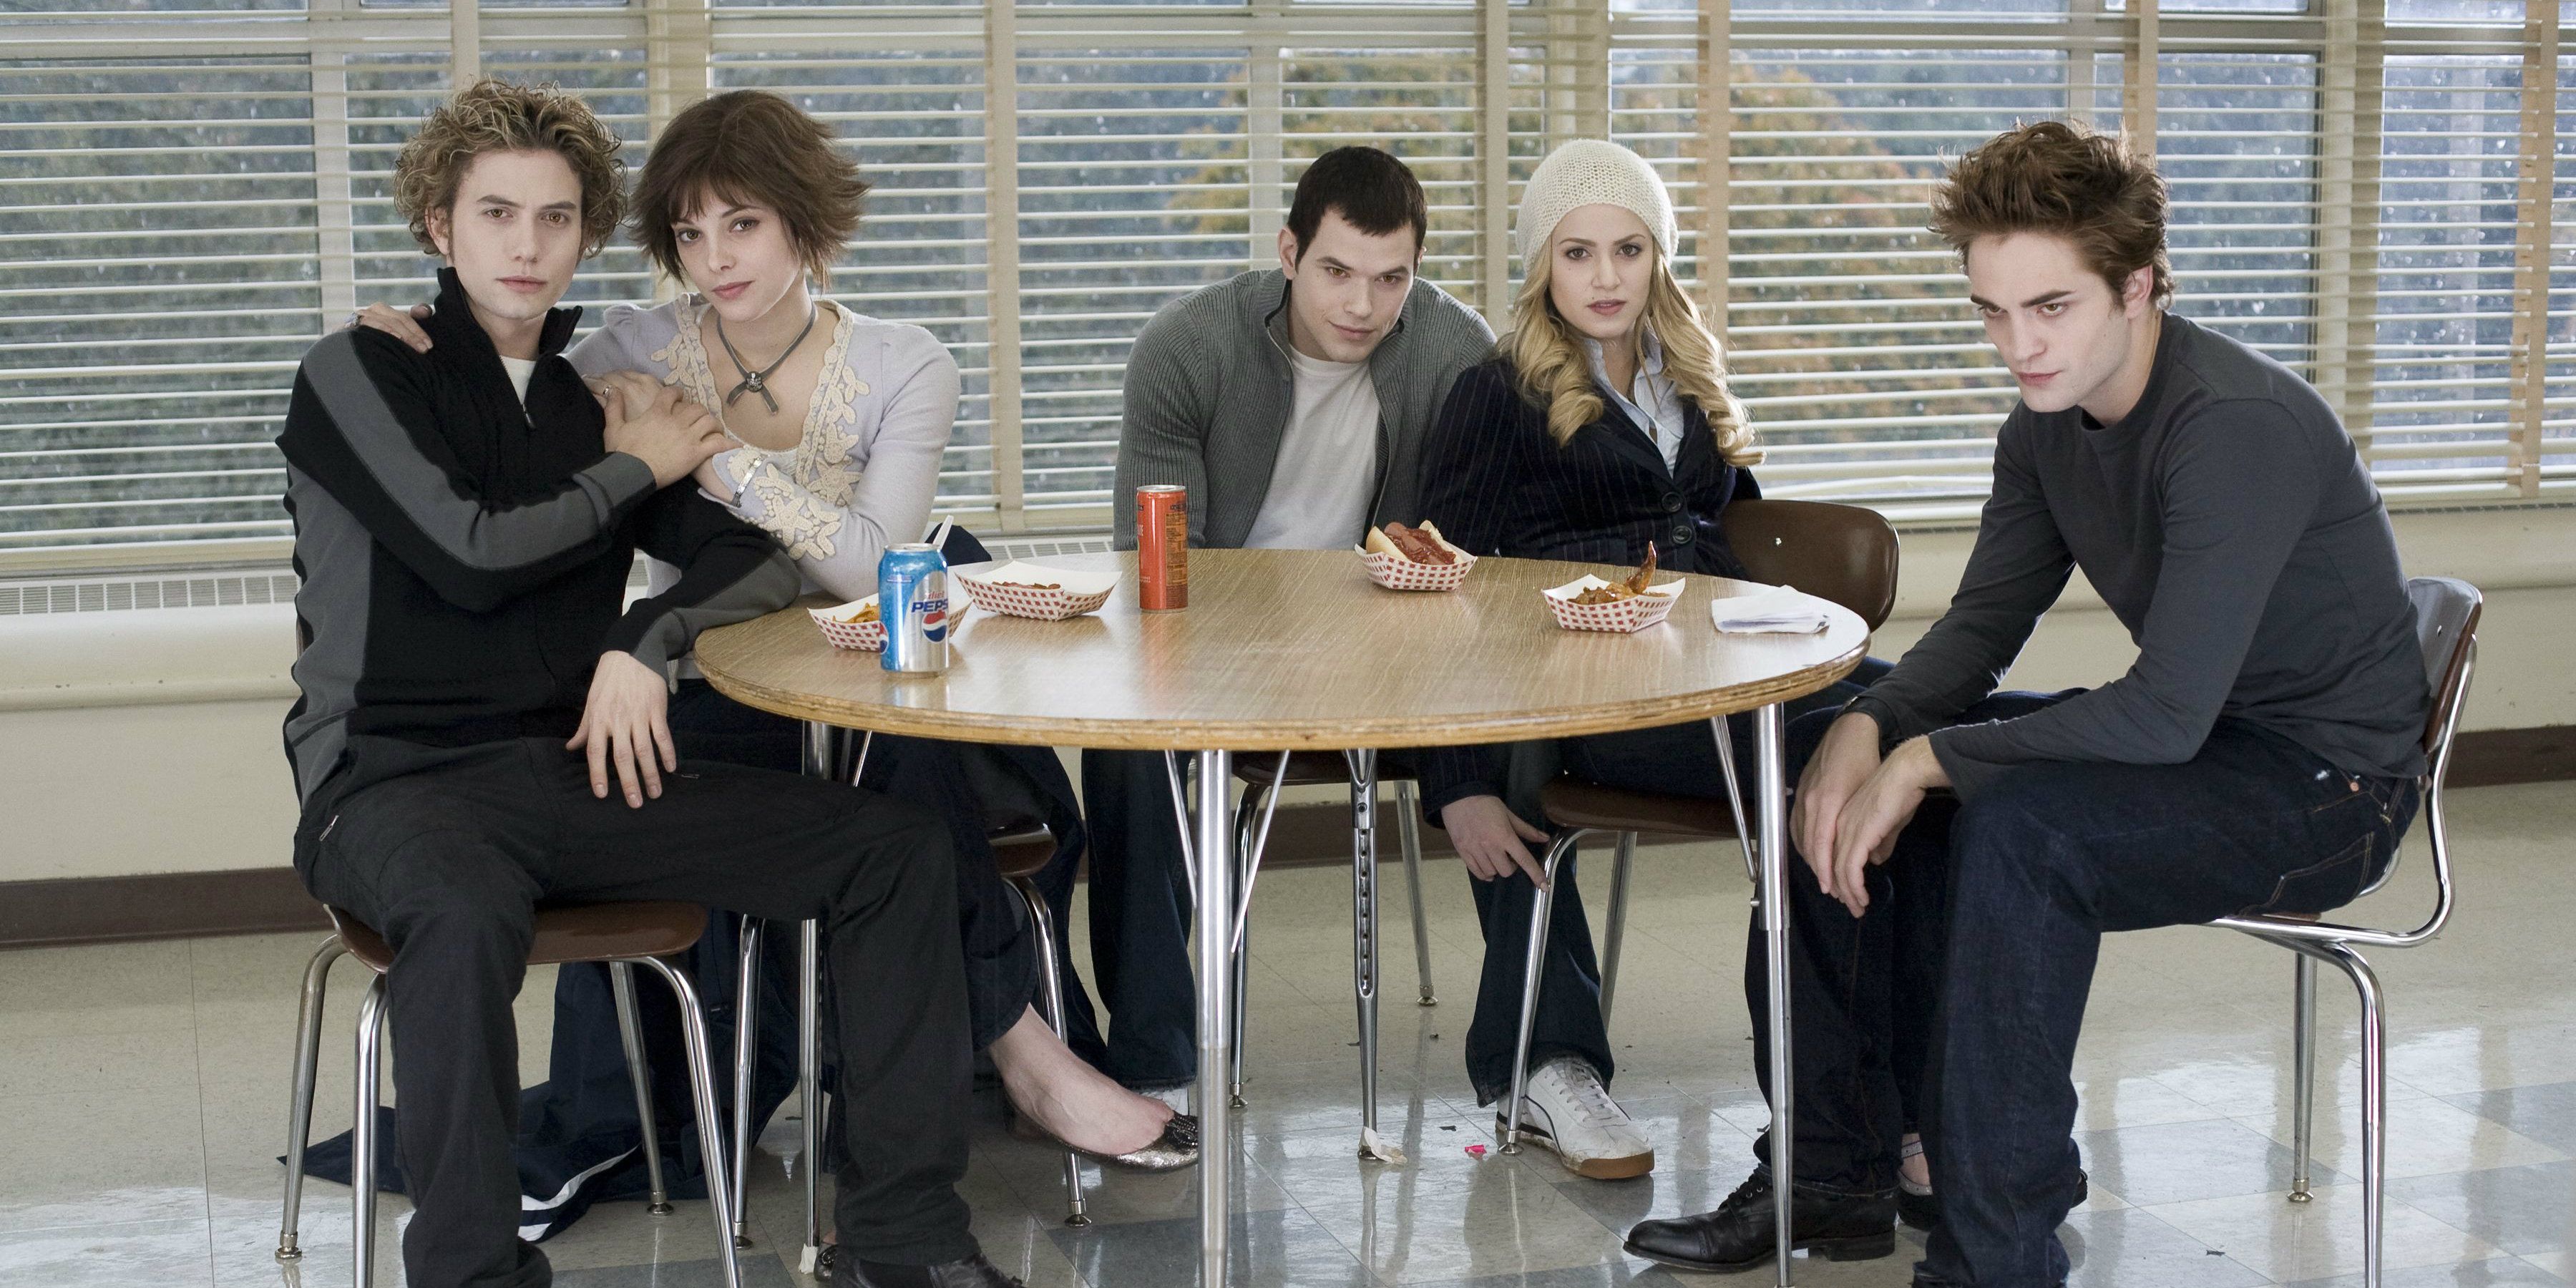 Cullen siblings sitting in cafeteria in Twilight.